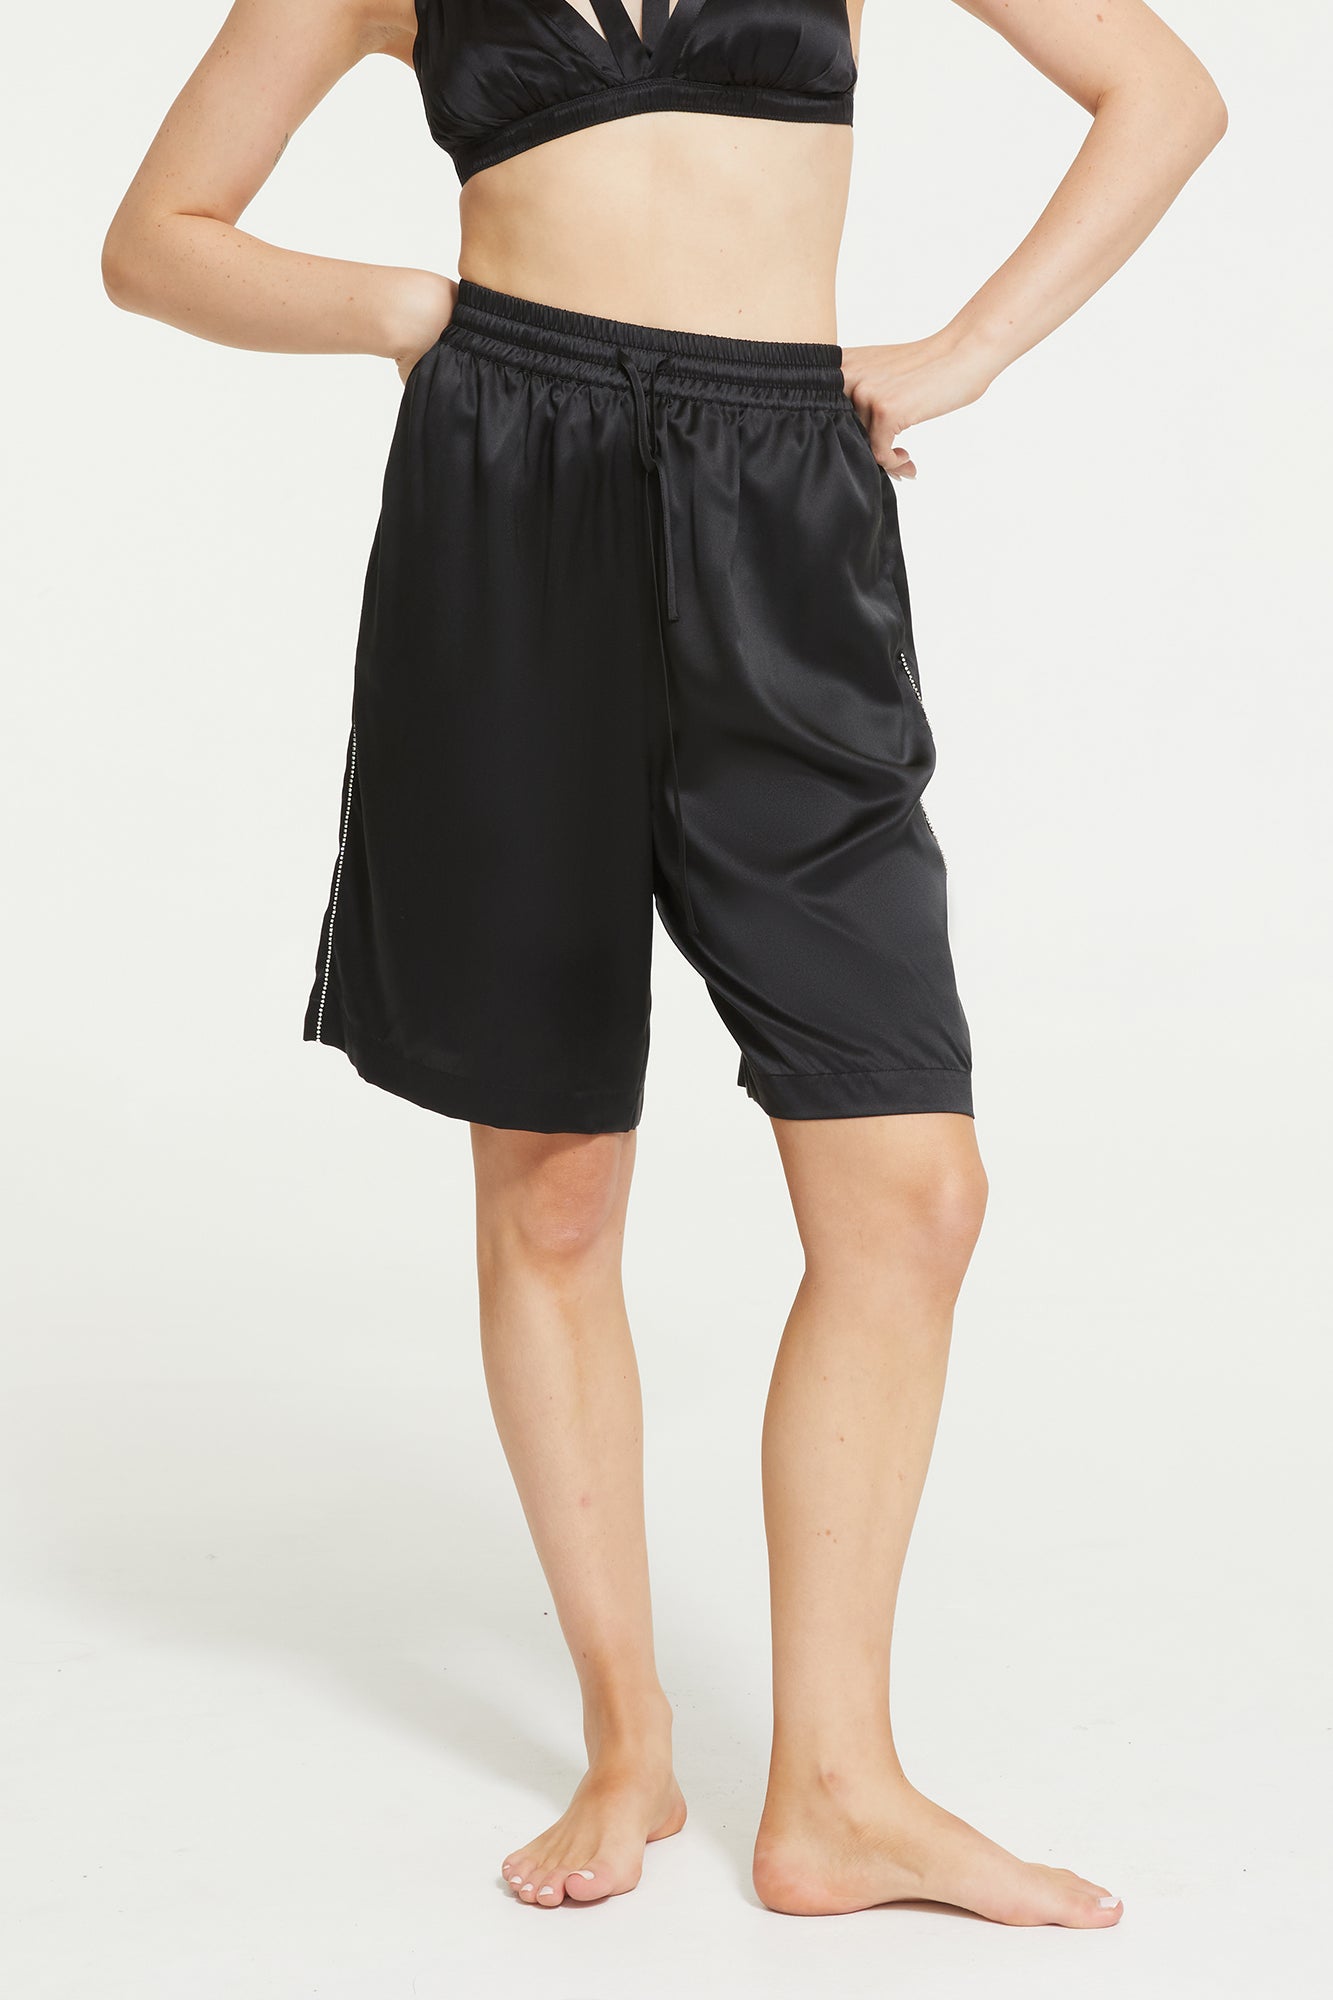 The Tom Boy Short in Black by Ginia